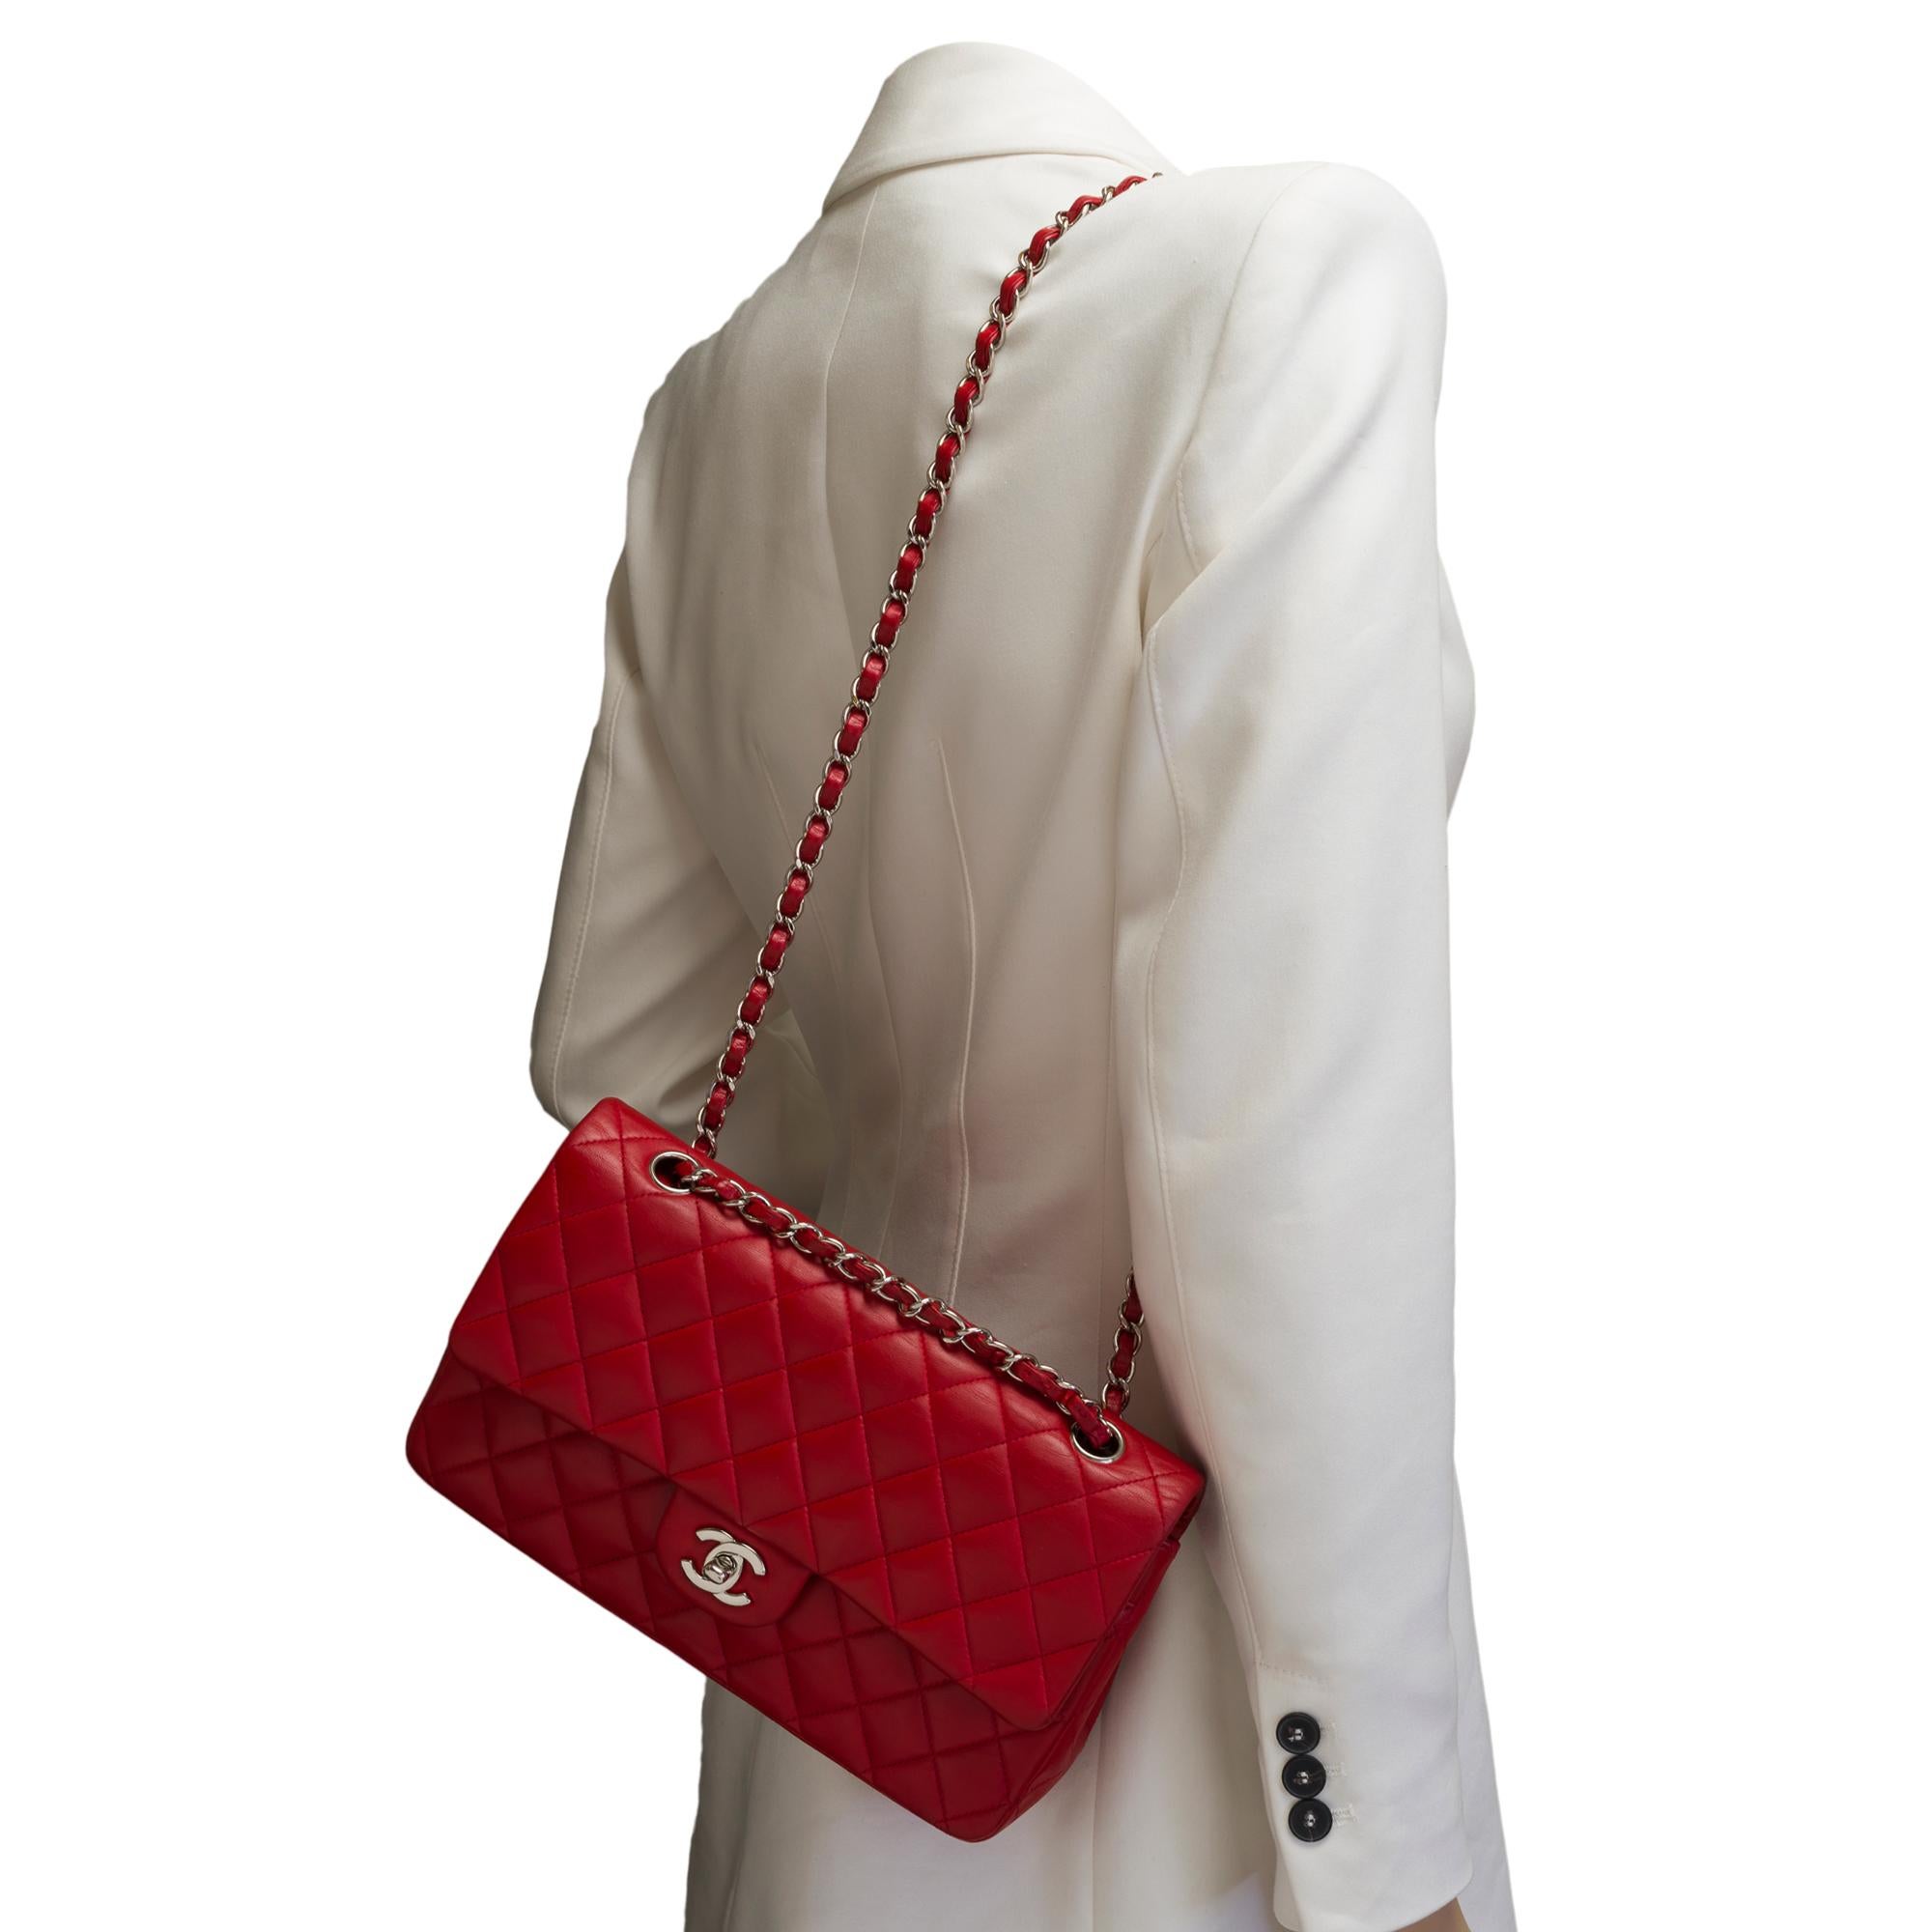 Chanel Timeless Medium double flap shoulder bag in Red lambskin leather, SHW For Sale 7